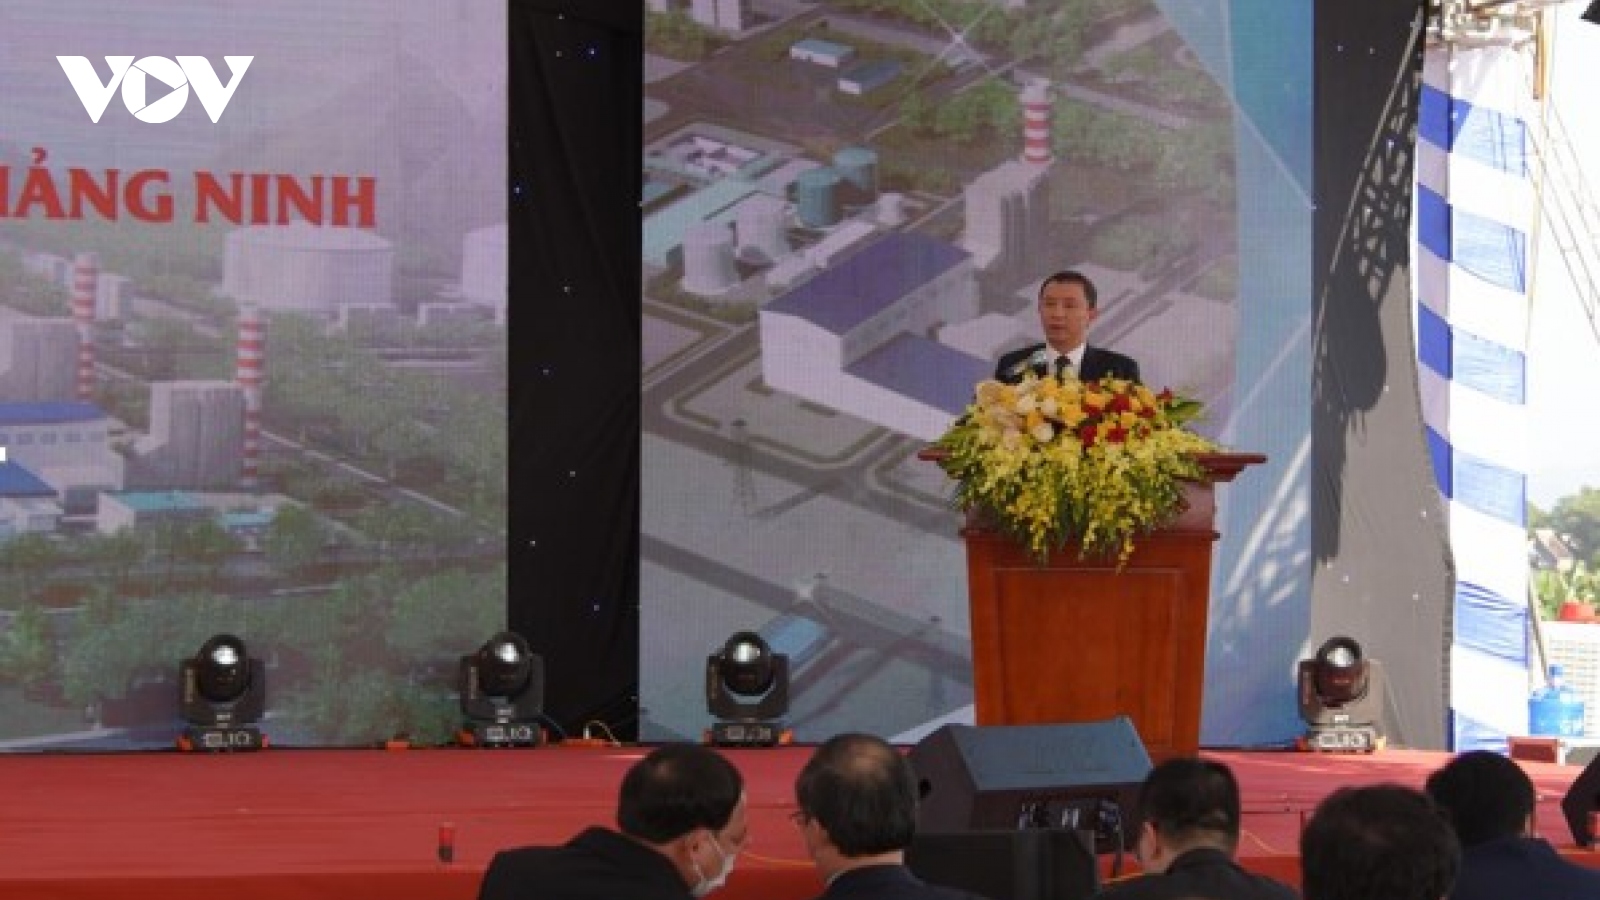 Quang Ninh LNG power plant project officially launched